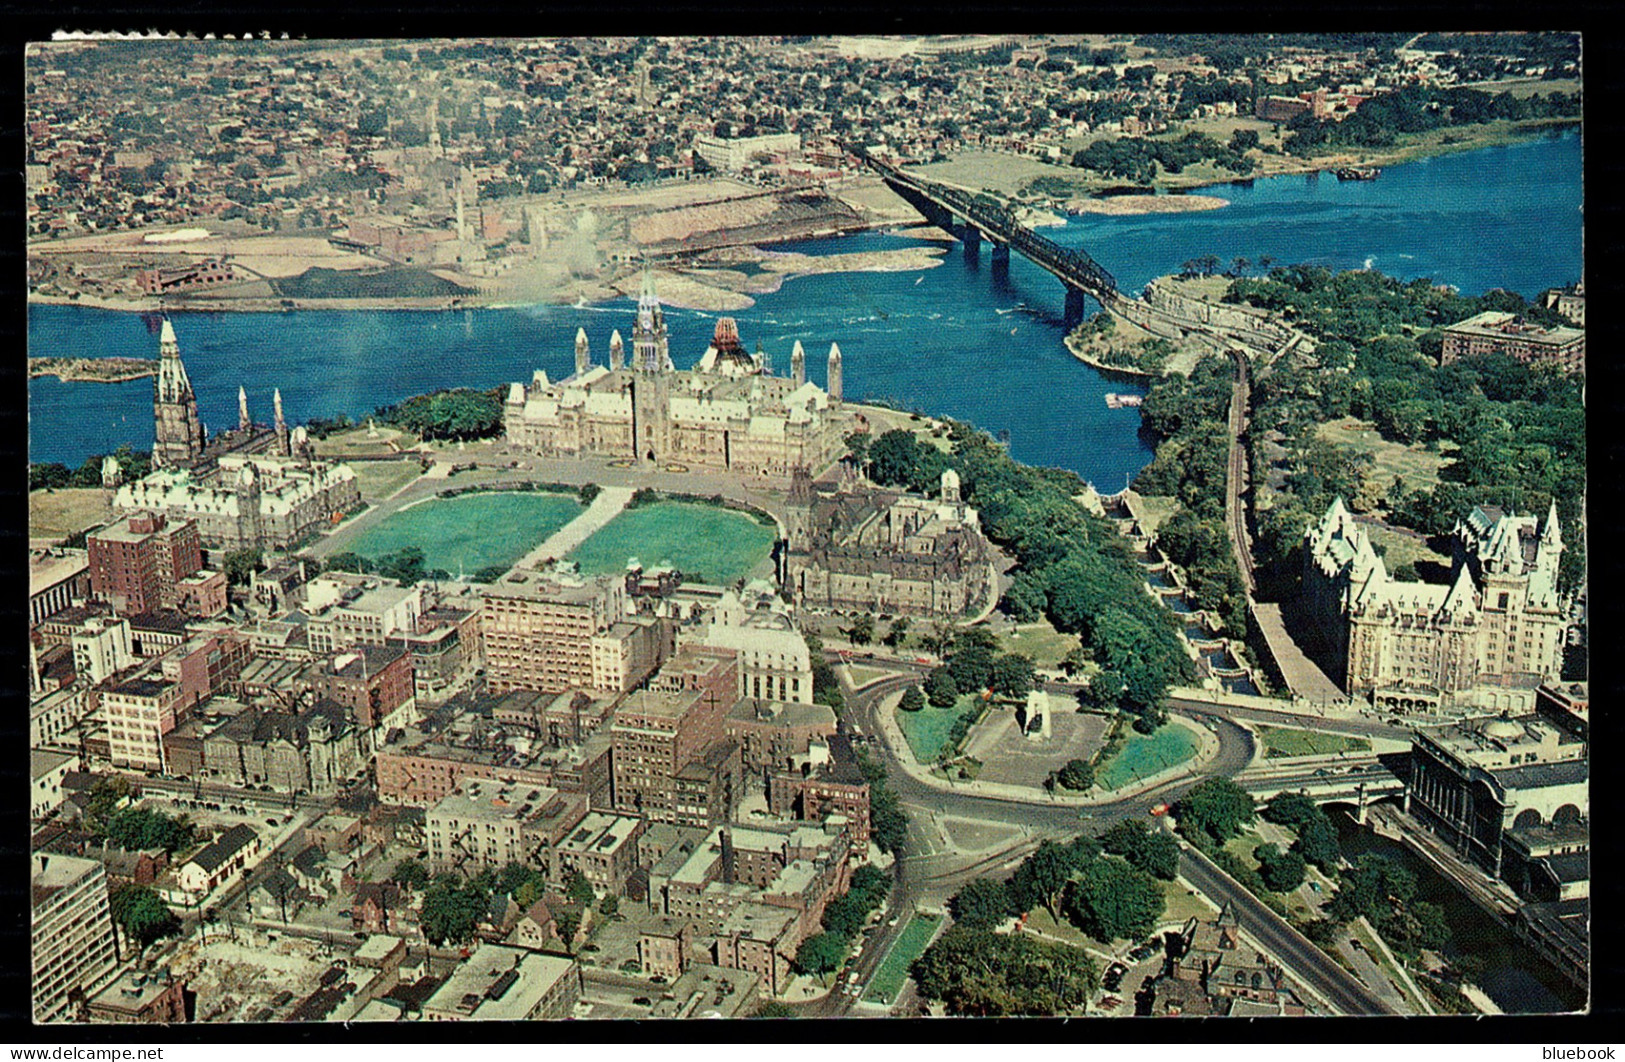 Ref 1620 - 1964 Postcard - Aerial View Of Parliament Canada - 4c Rate With Good Slogan - Storia Postale